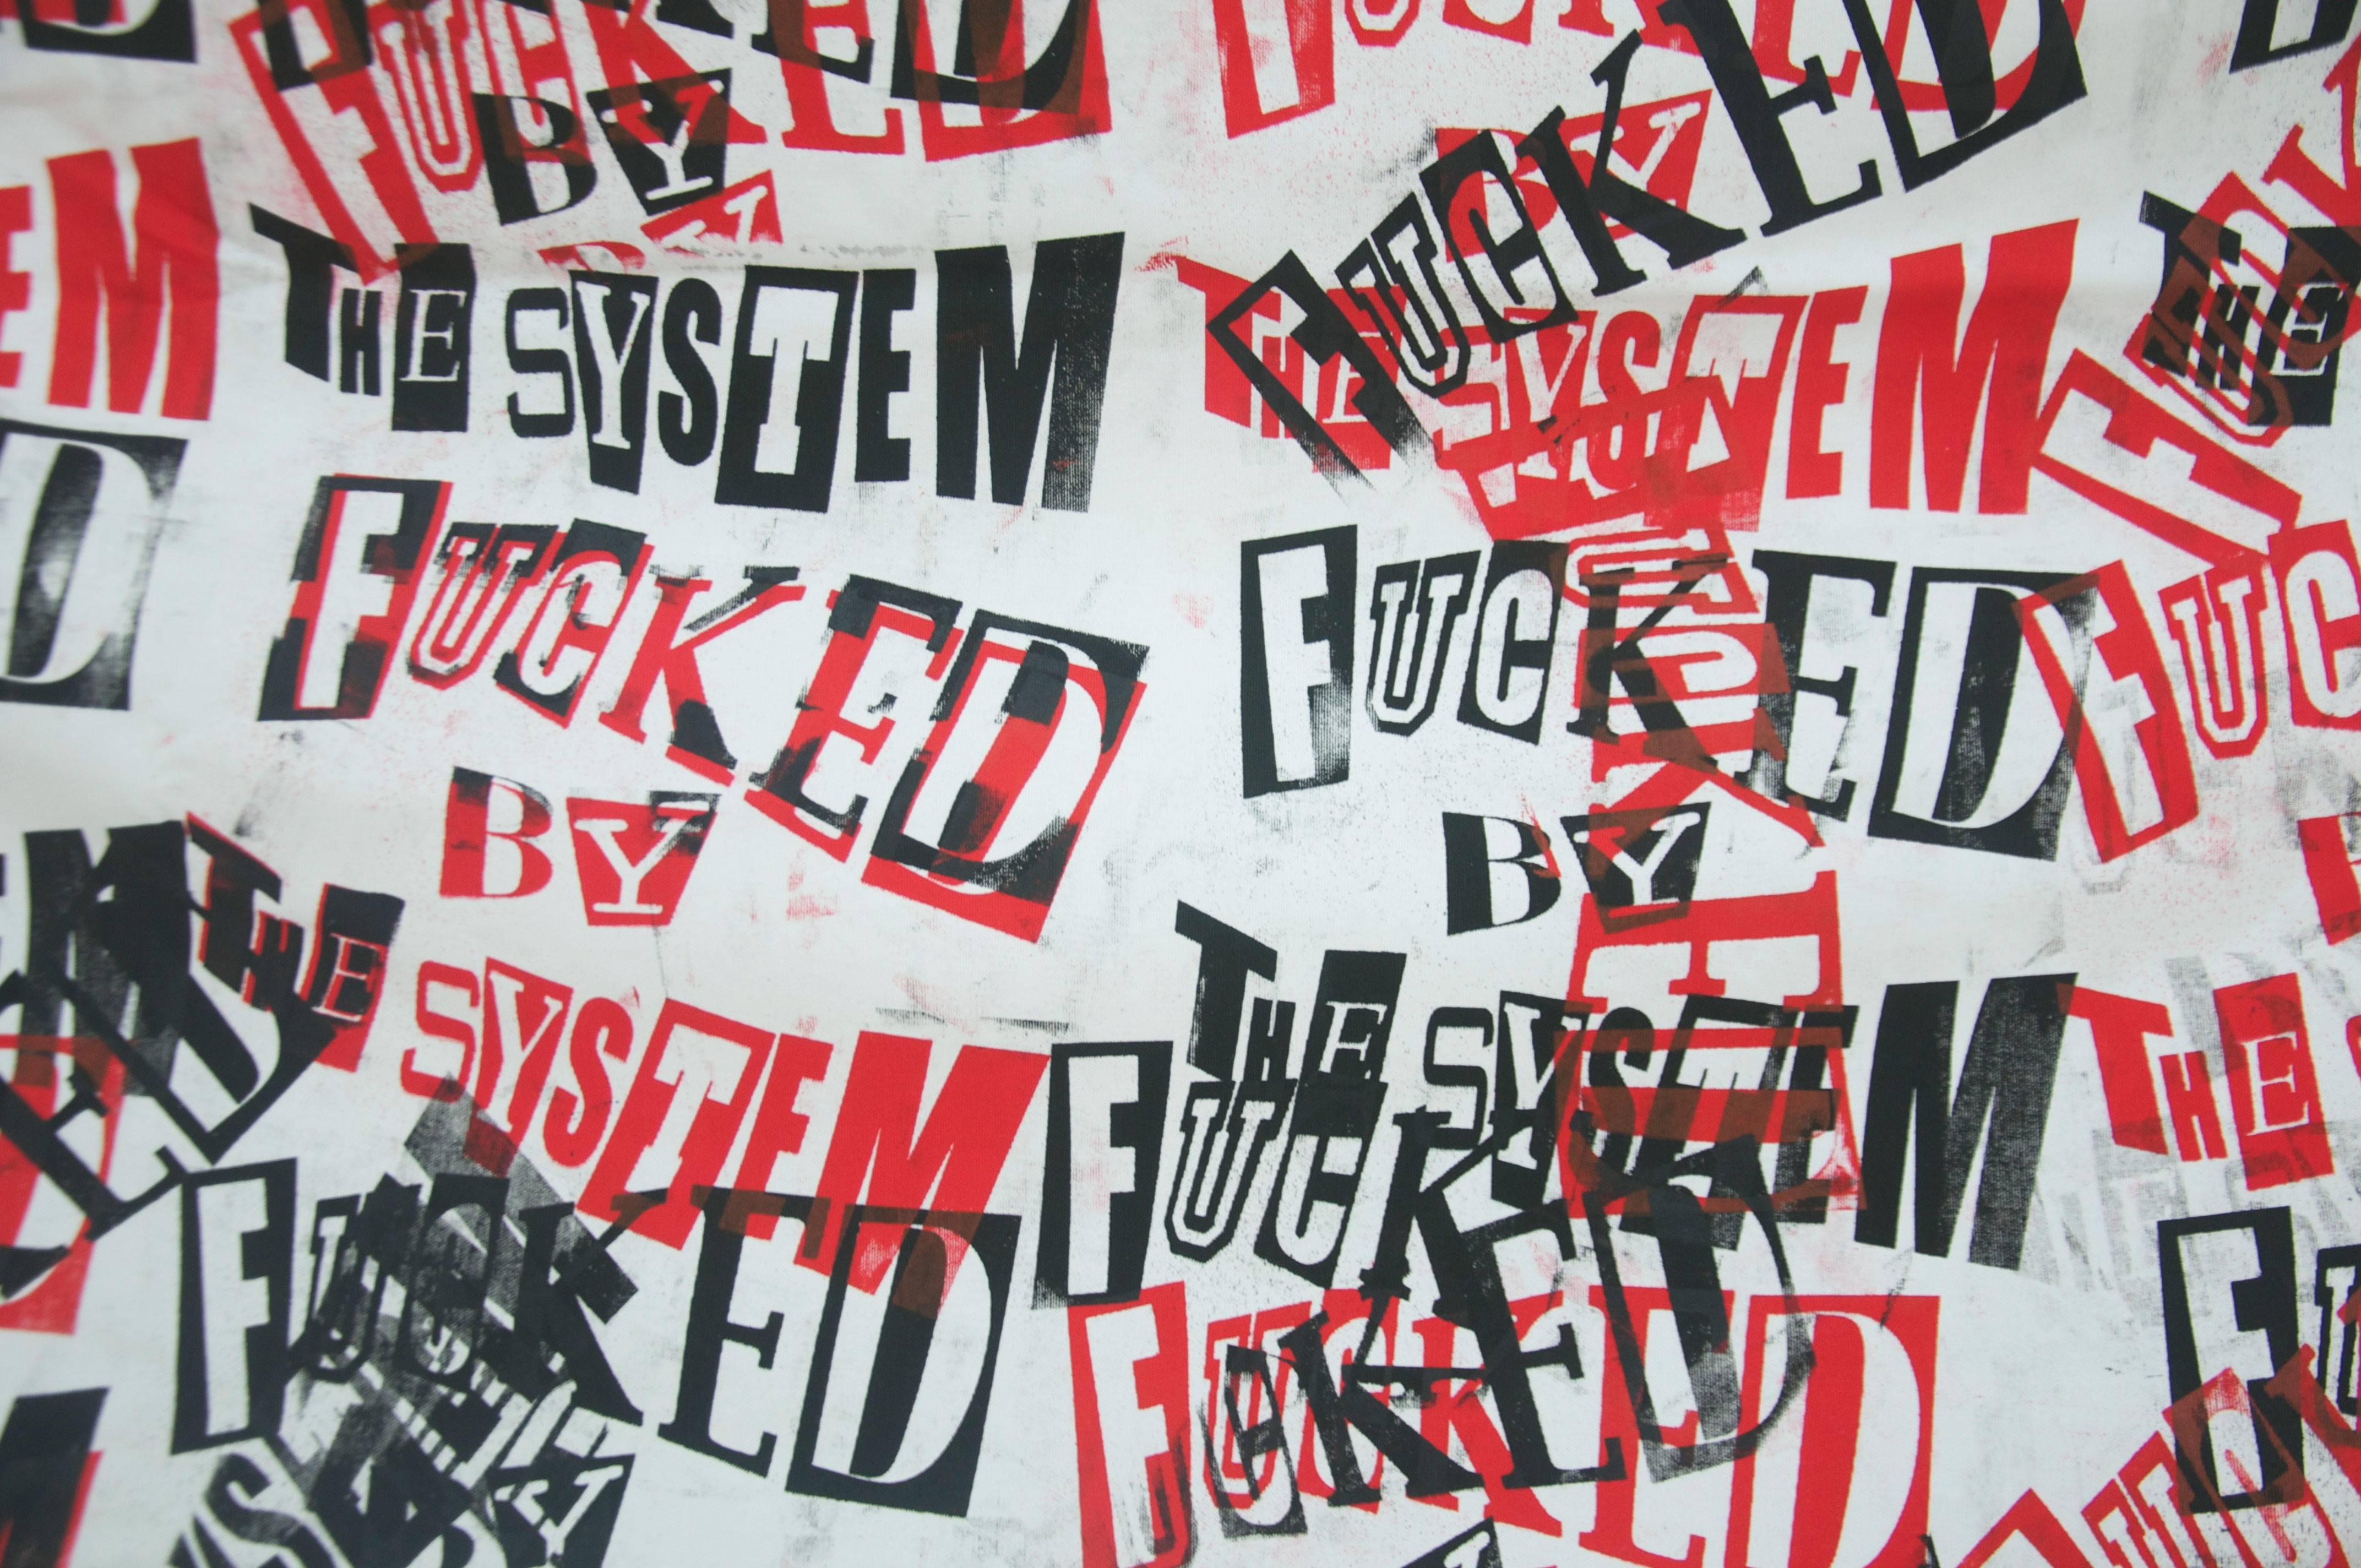 Fucked By the System (Black and Red) - Painting by Pierre Carrilero